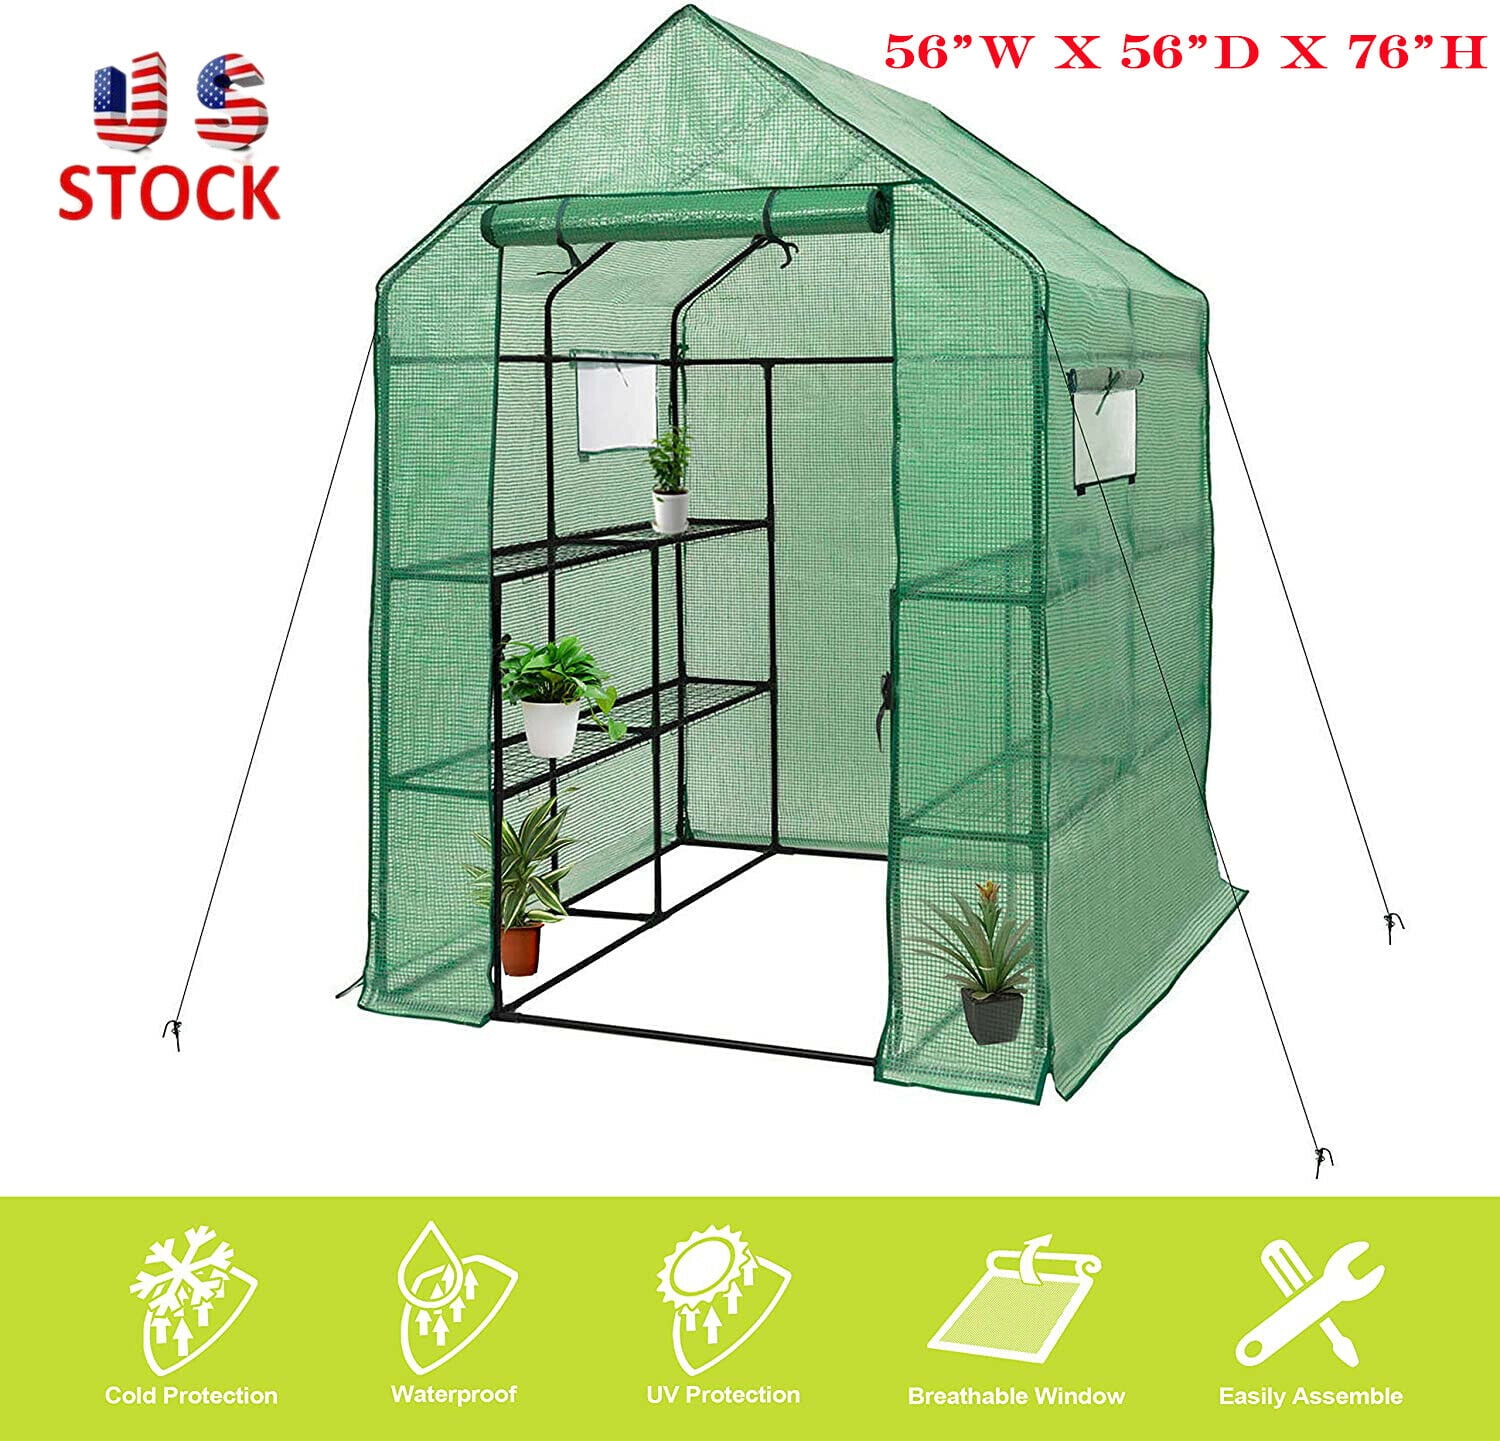 Details about   Walk in Greenhouse Outdoor Home Gardening UV Protected with 2 Zipper Doors 